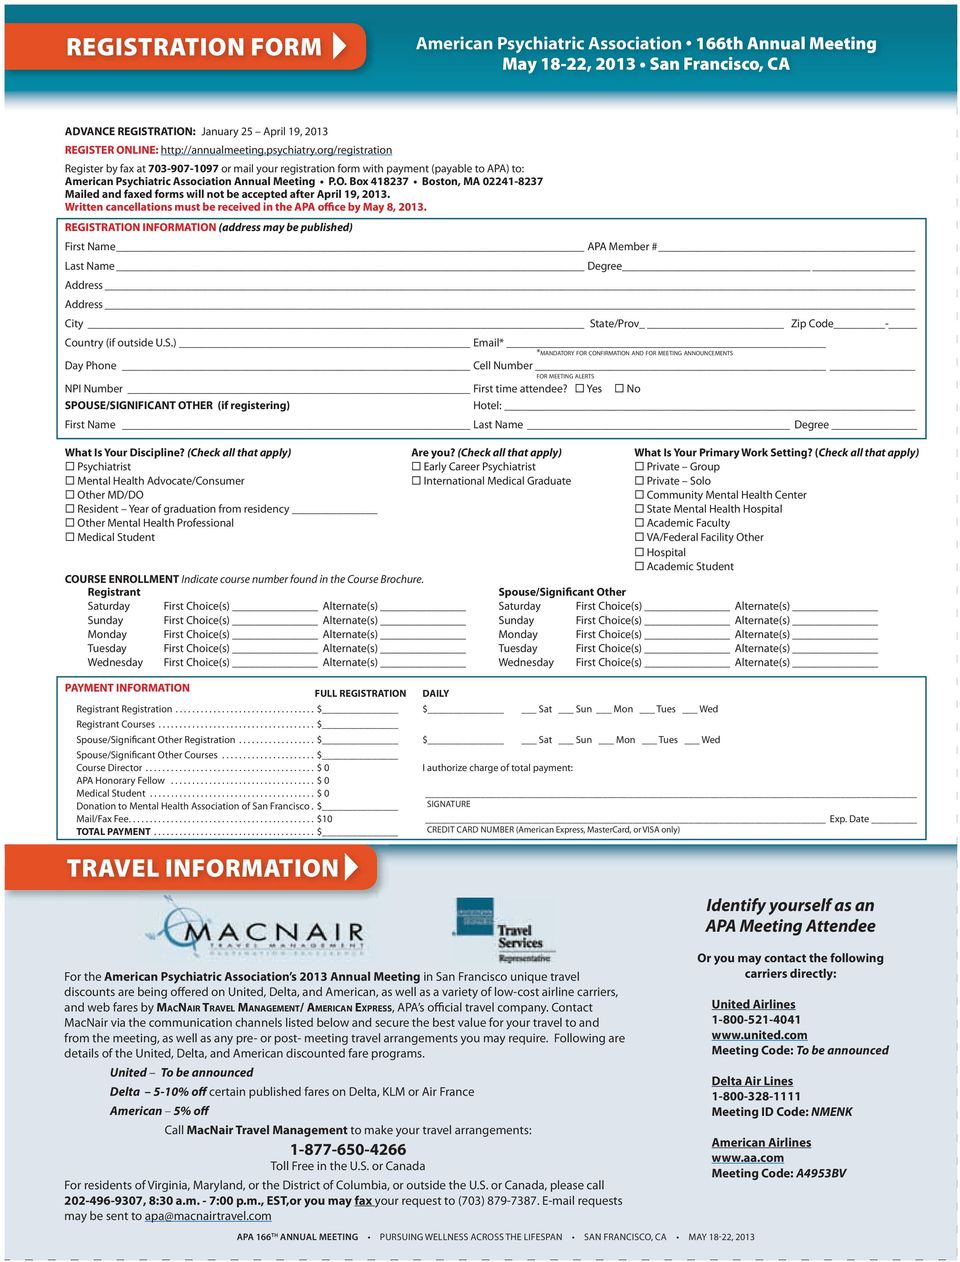 Written cancellations must be received in the APA office by May 8, 2013.